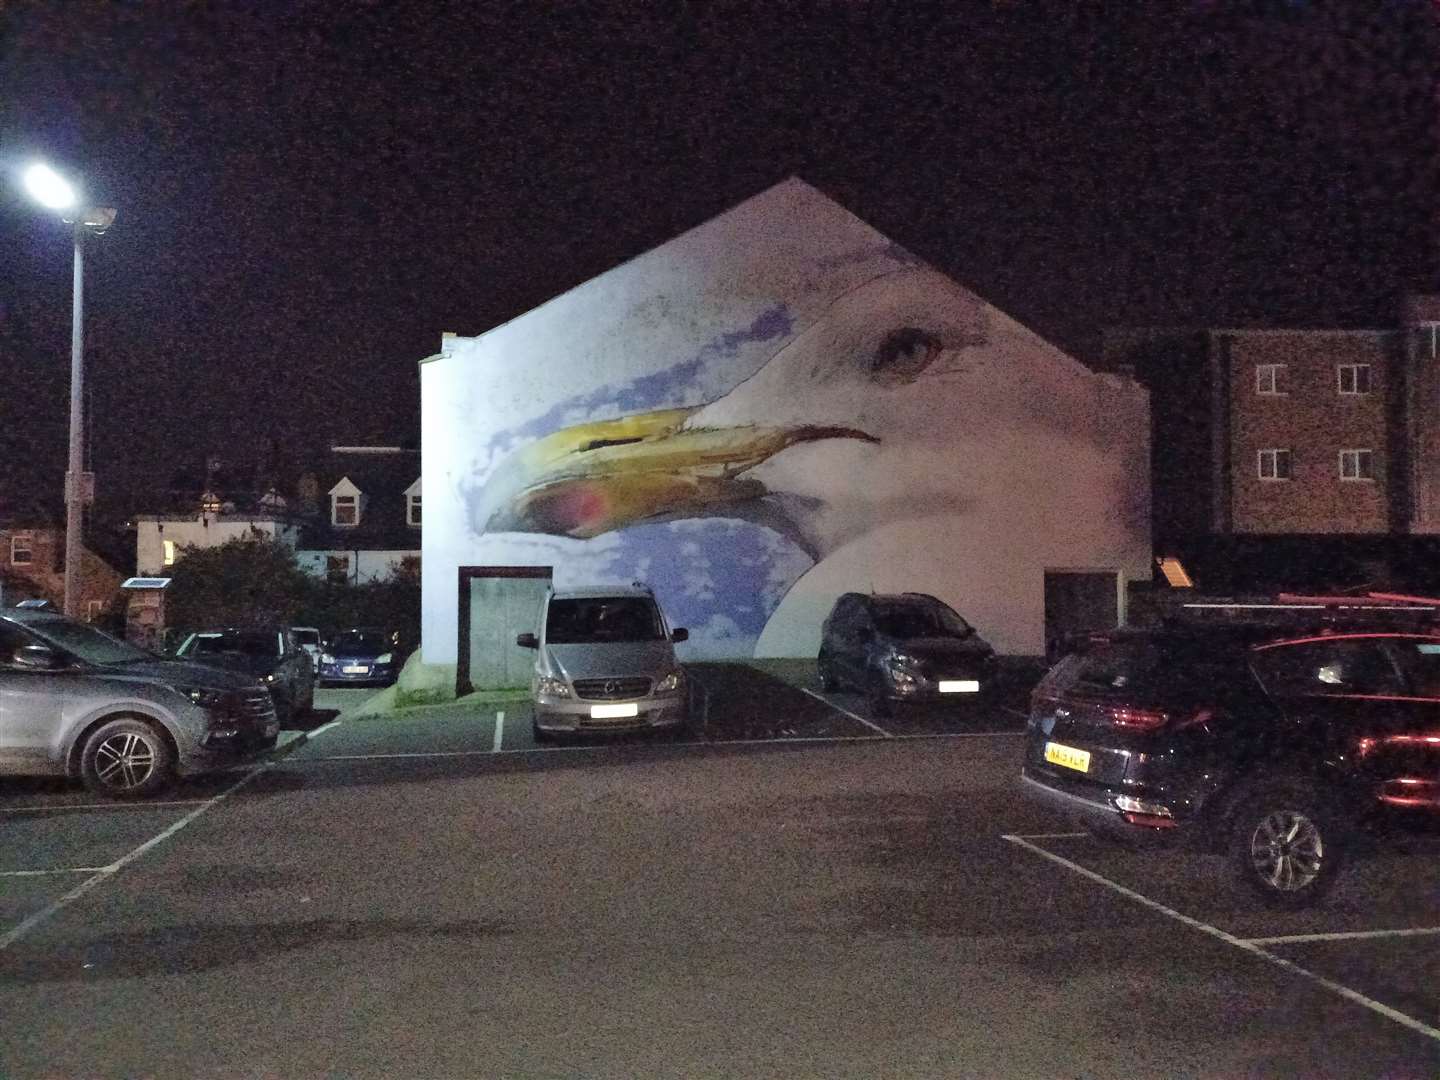 We pulled up in the car park next to Lidl in Folkestone, where artist Leigh Mulley's seagull mural adorns the wall on the back of the old Metronome theatre